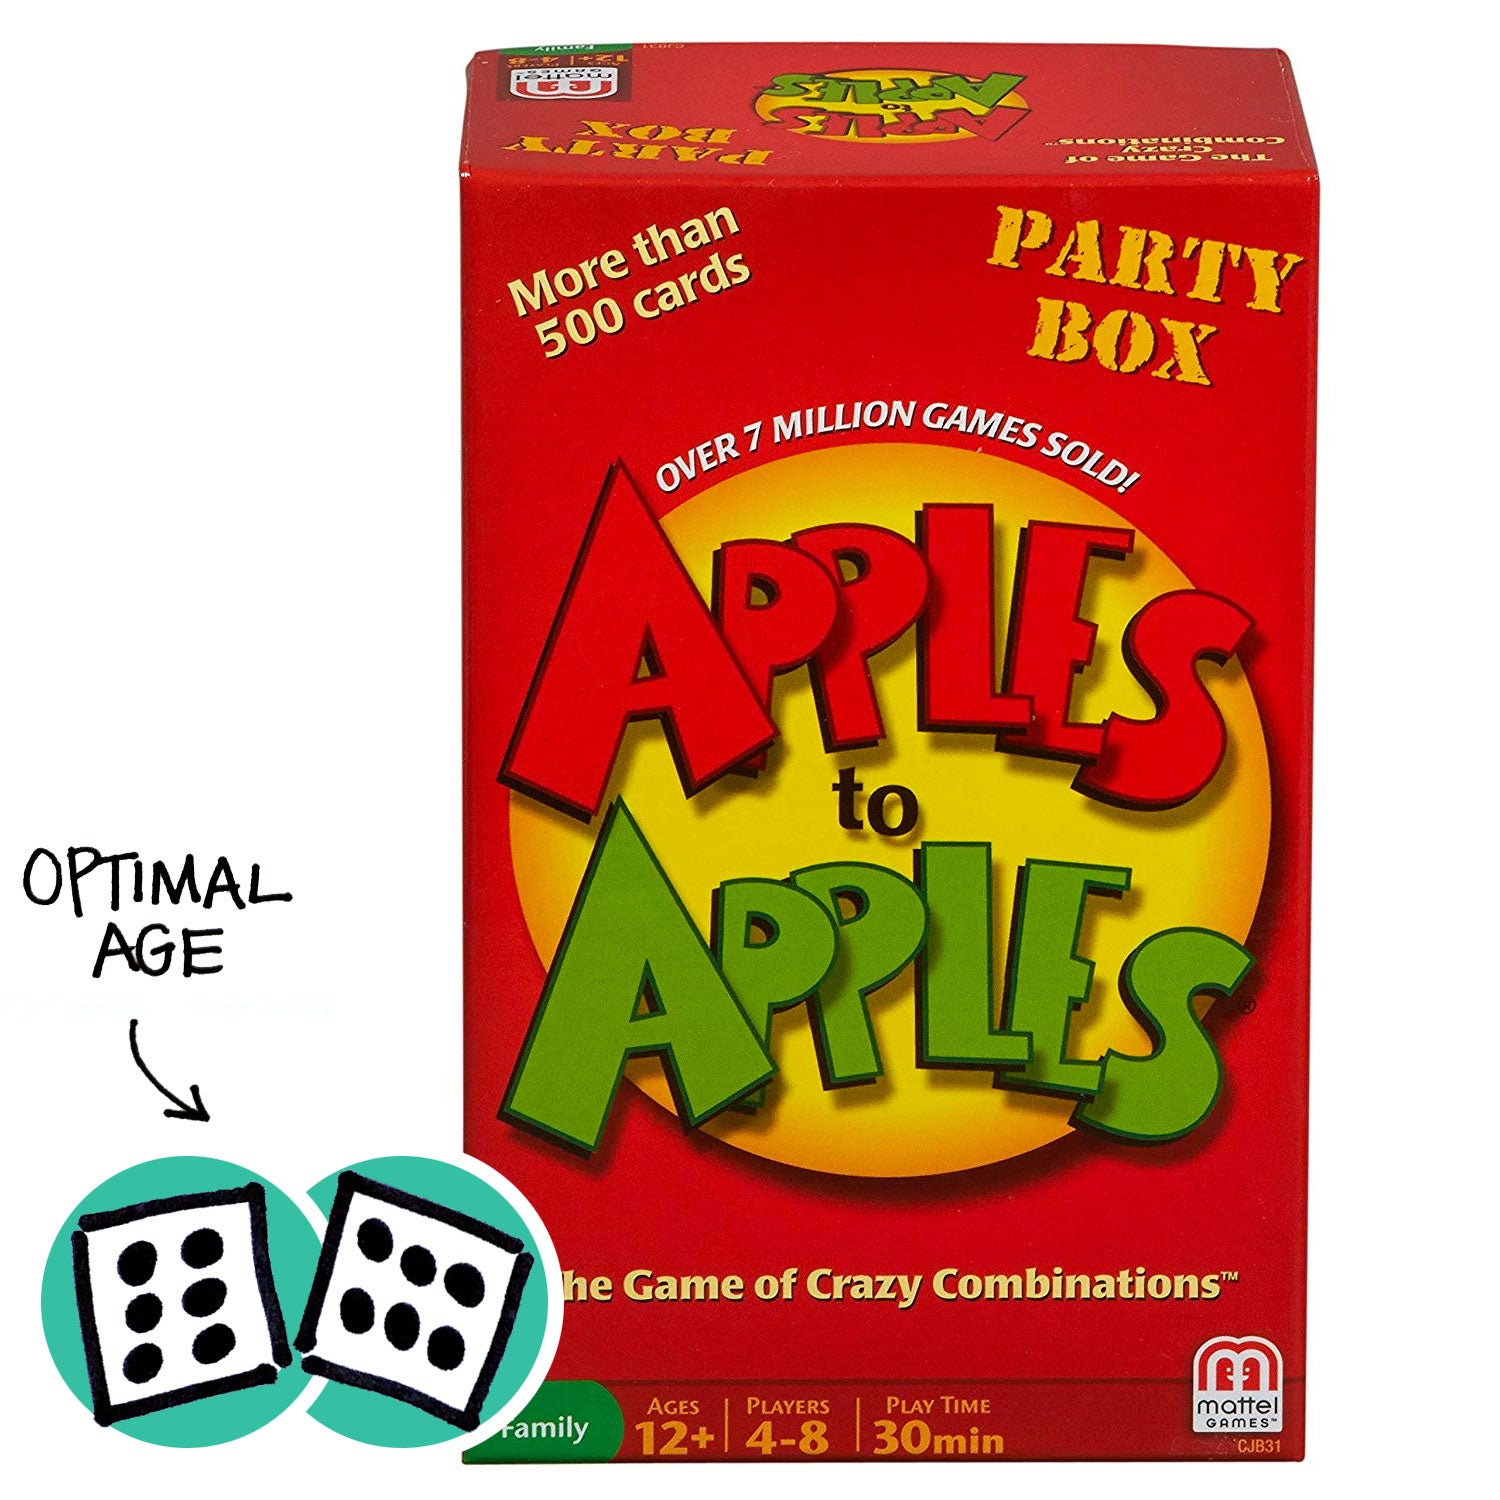 Apples to Apples product image with optimal age (12)